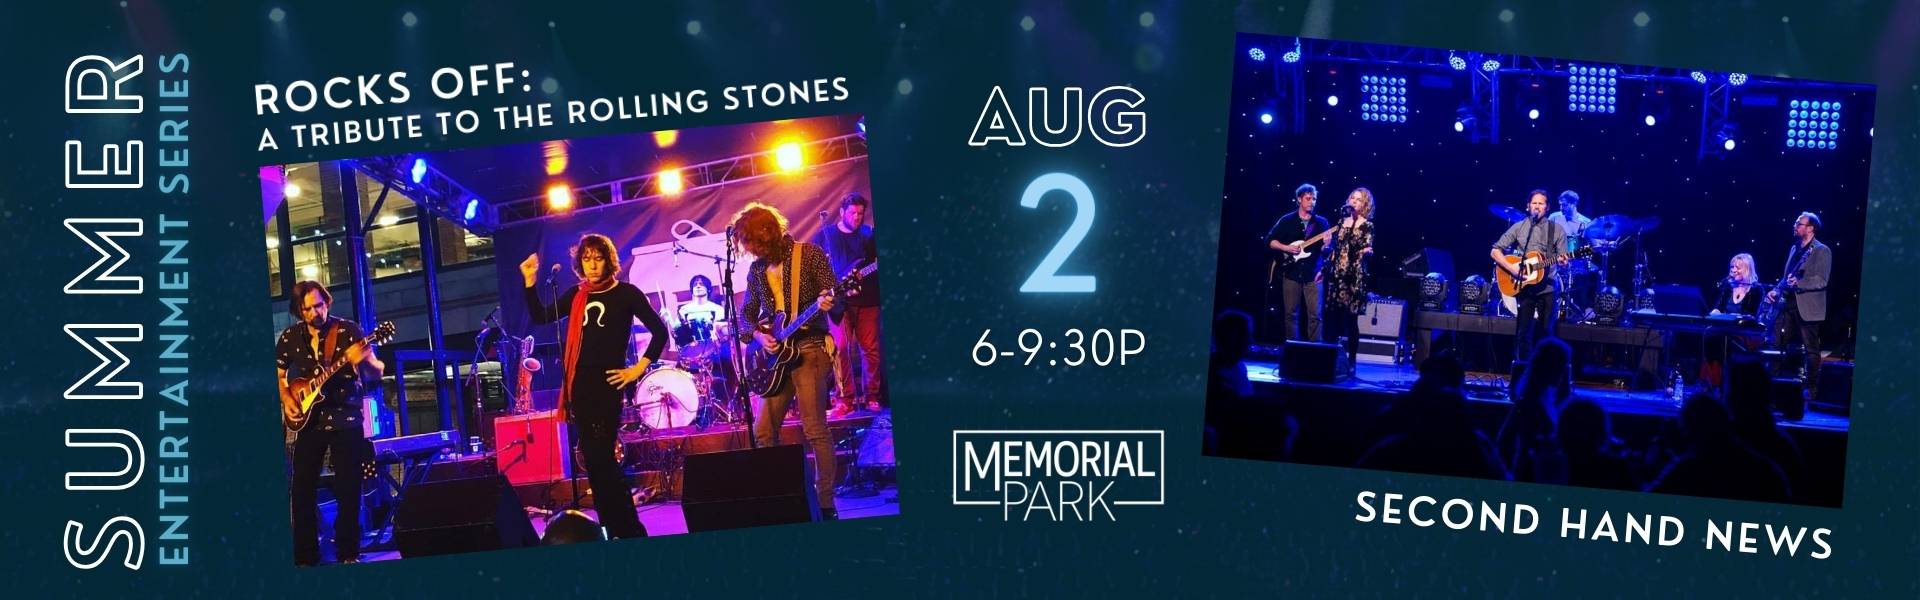 Memorial Park performance featuring Rocks Off and Second Hand News